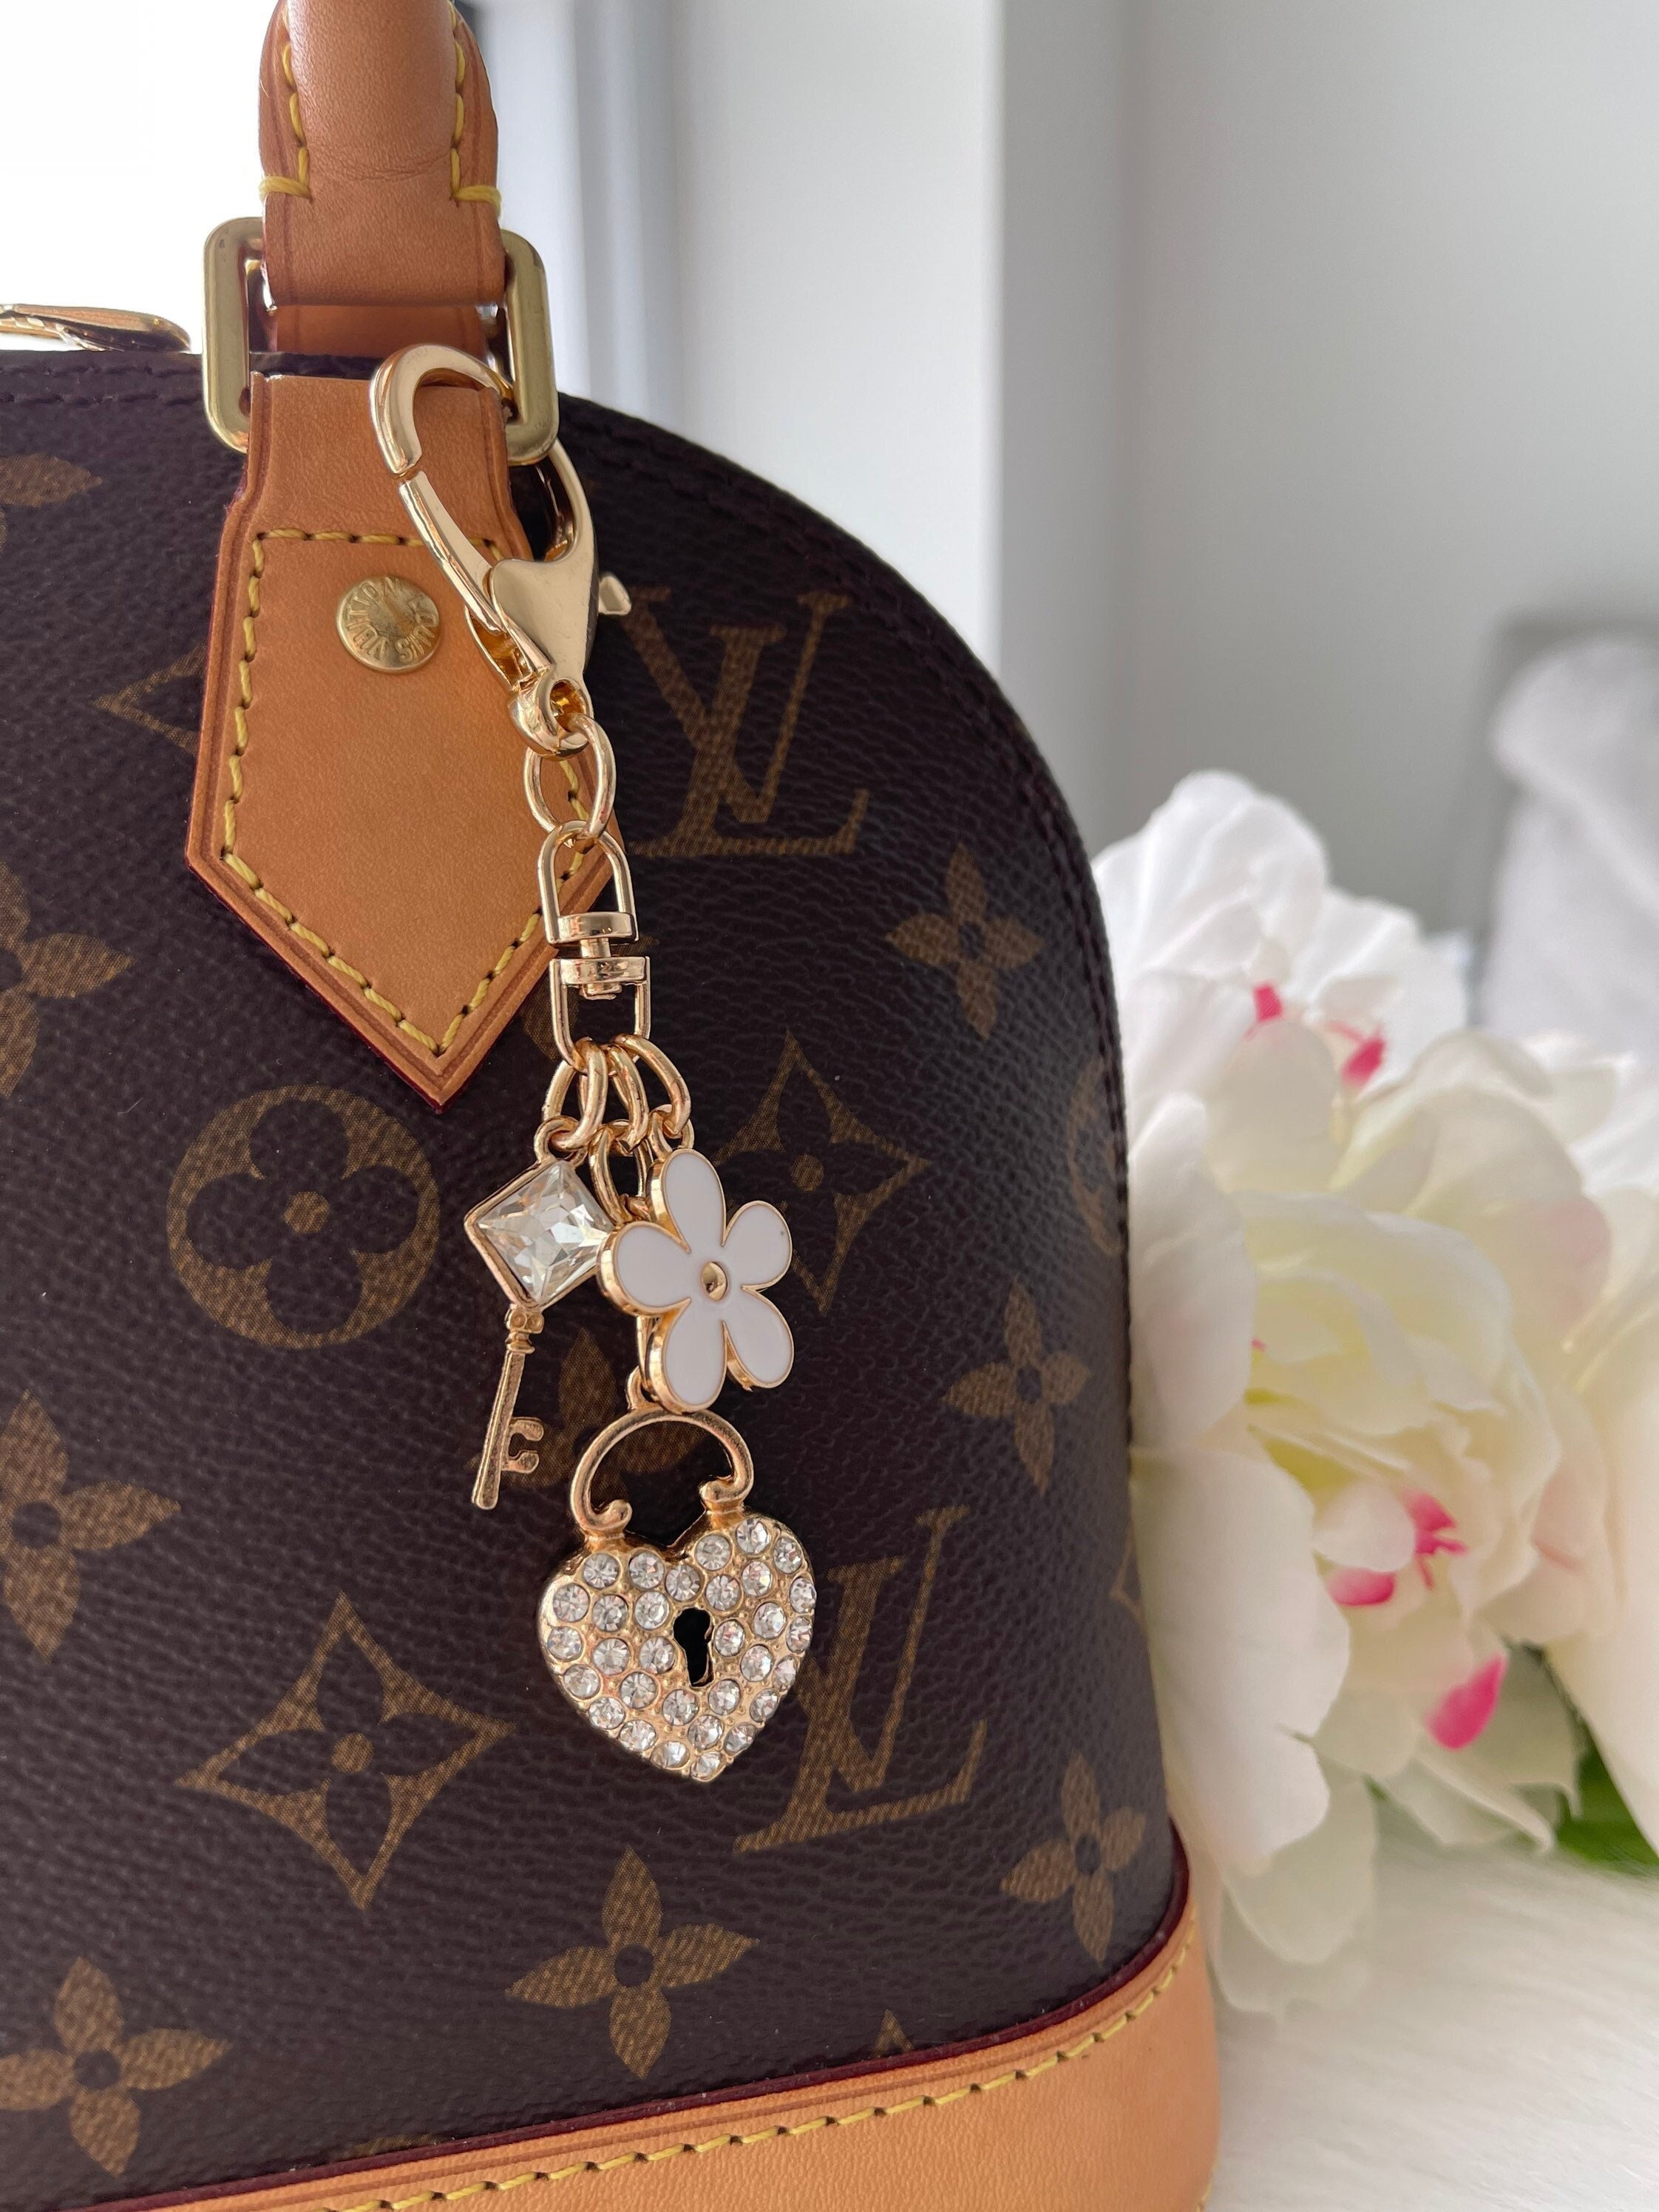 Louis Vuitton - Authenticated Idylle Blossom Bag Charm - Metal Gold for Women, Very Good Condition